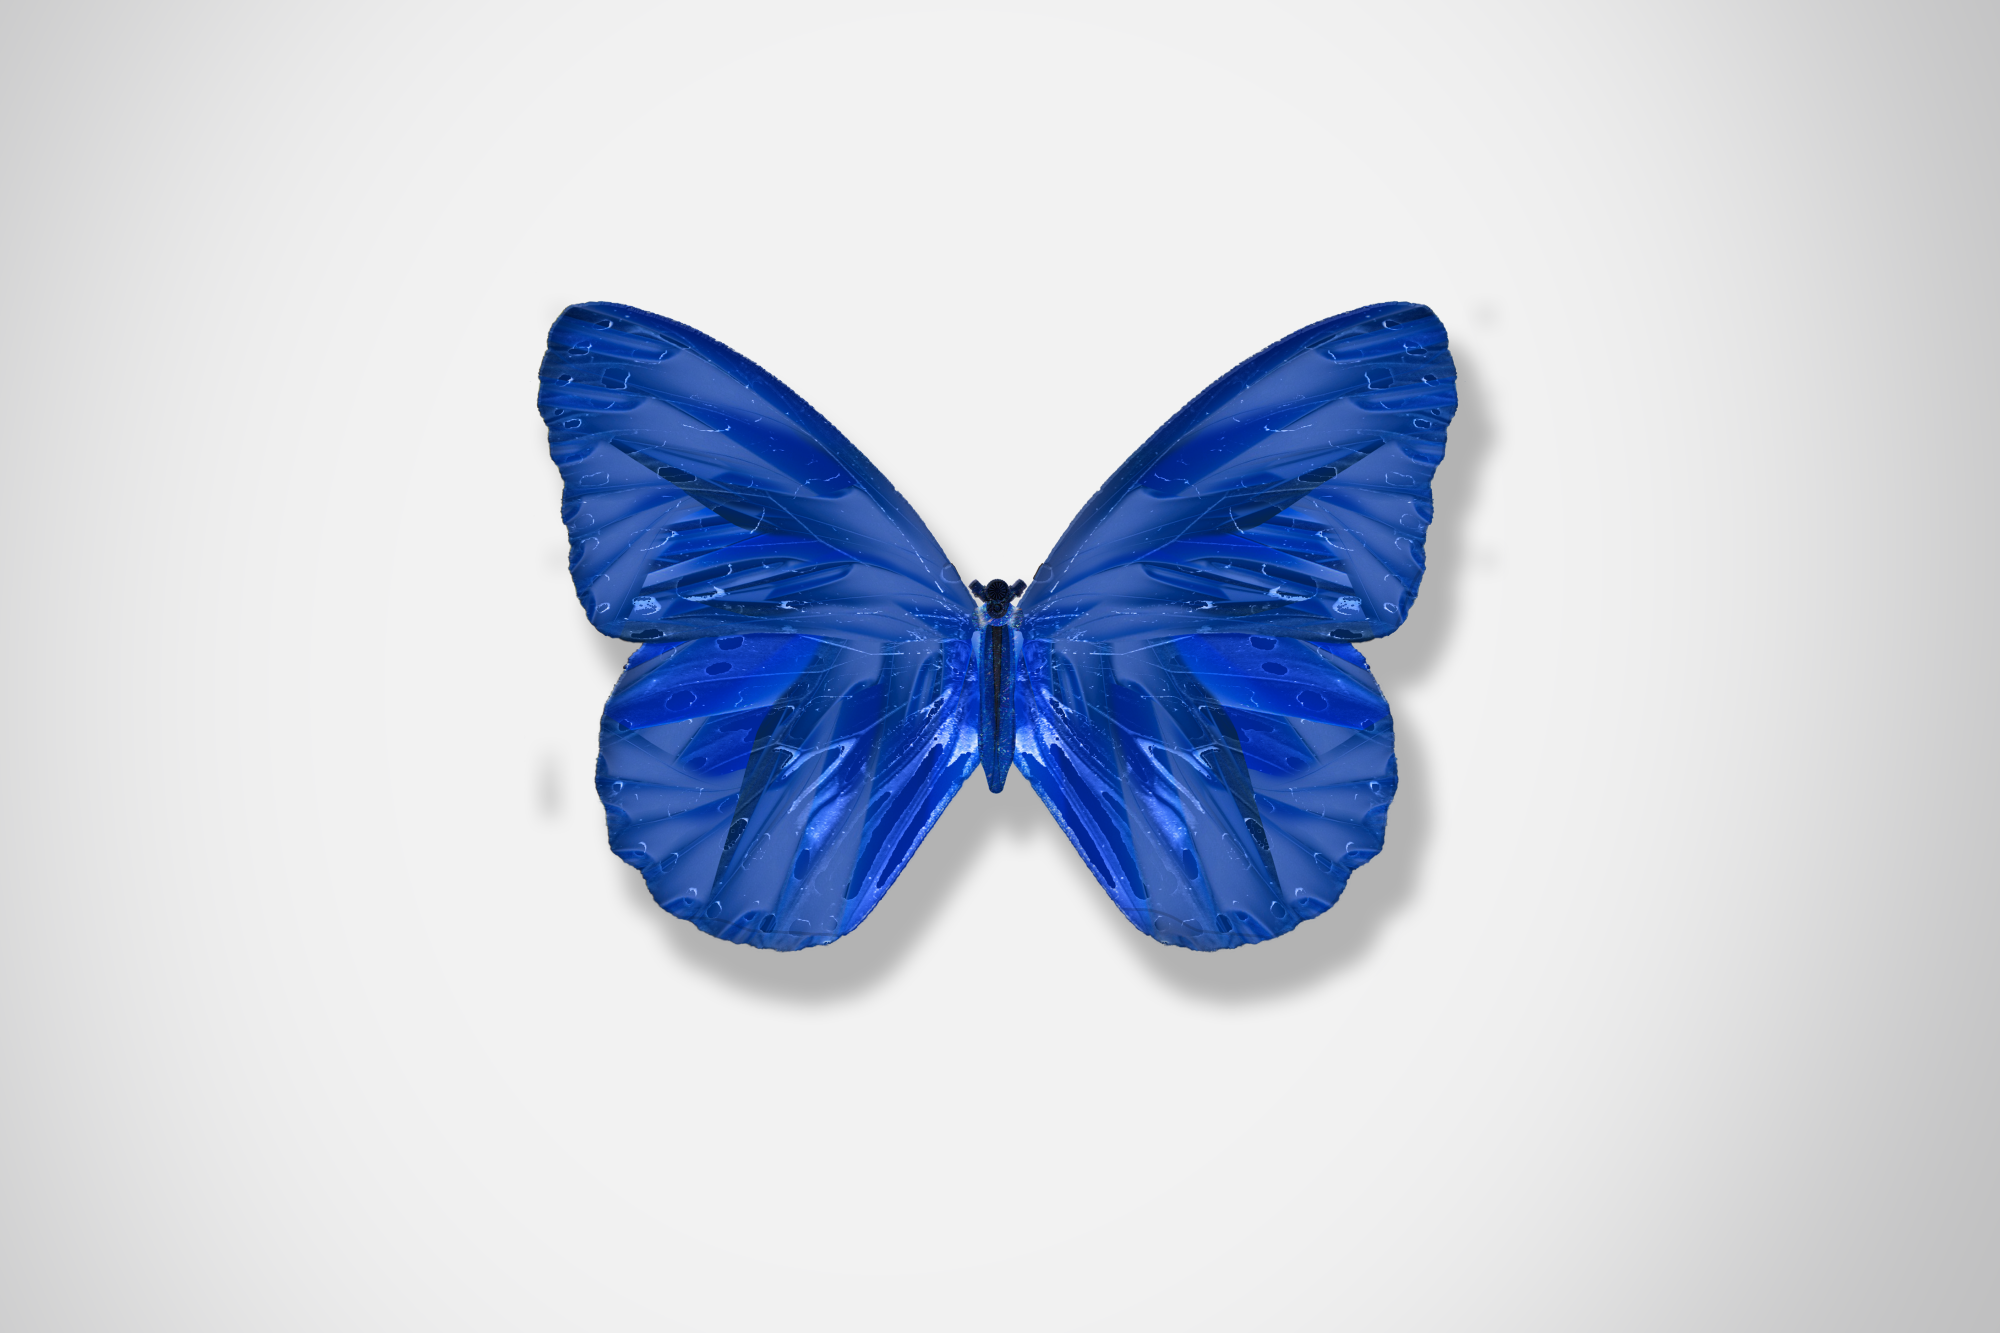 Ford_Butterflies_Concept_The_Beauty_Of_Change_DKLG_Design_005.png